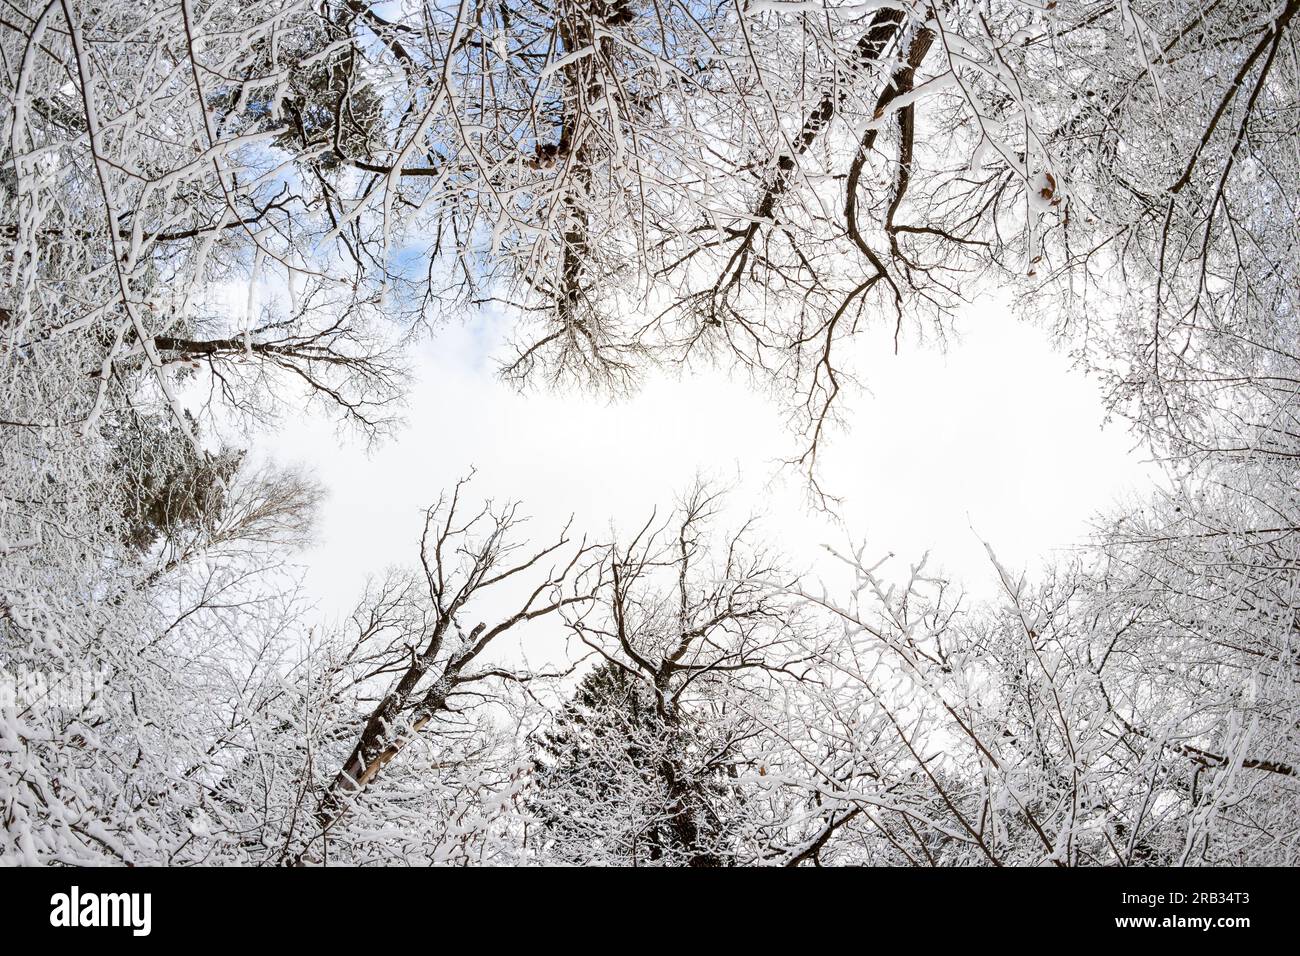 View of tree branches closing overhead in a winter forest, fish-eye effect Stock Photo